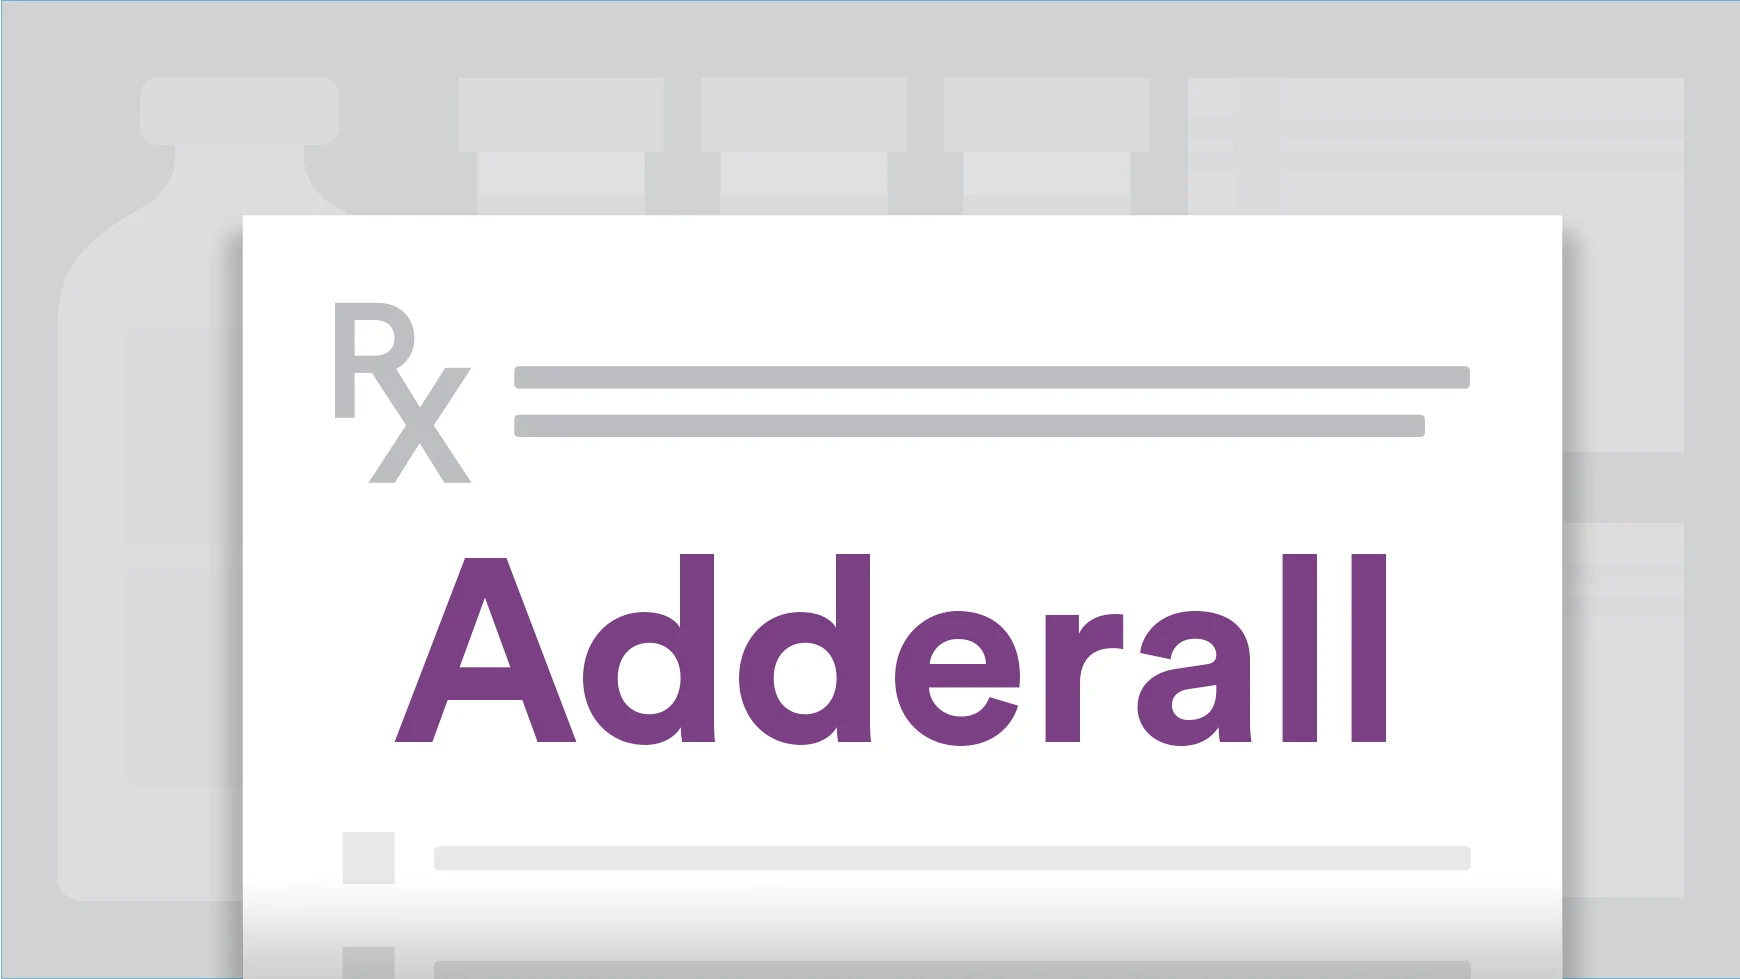 Adderall is used to treat attention deficit hyperactivity disorder (ADHD)